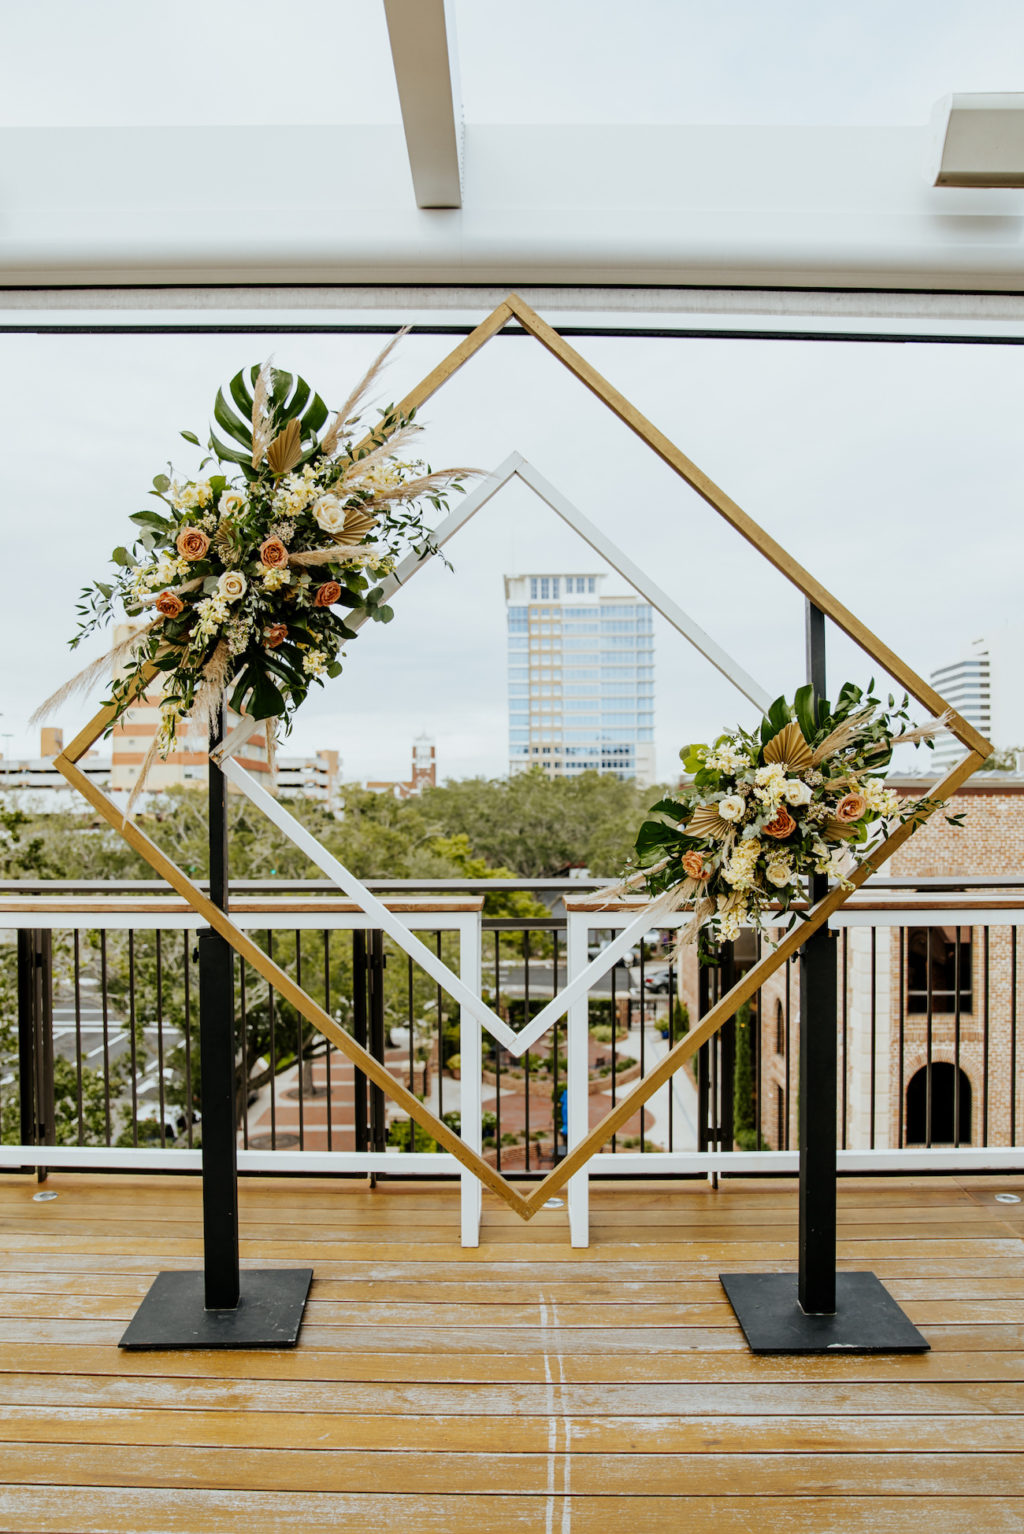 Boho St. Pete Florida Wedding at Red Mesa Events Rooftop | Geometric Diamond Ceremony Arch Floral Spray Arrangement with White and Copper Quicksand Roses, White Stock, Pampas Grass, and Tropical eucalyptus Greenery